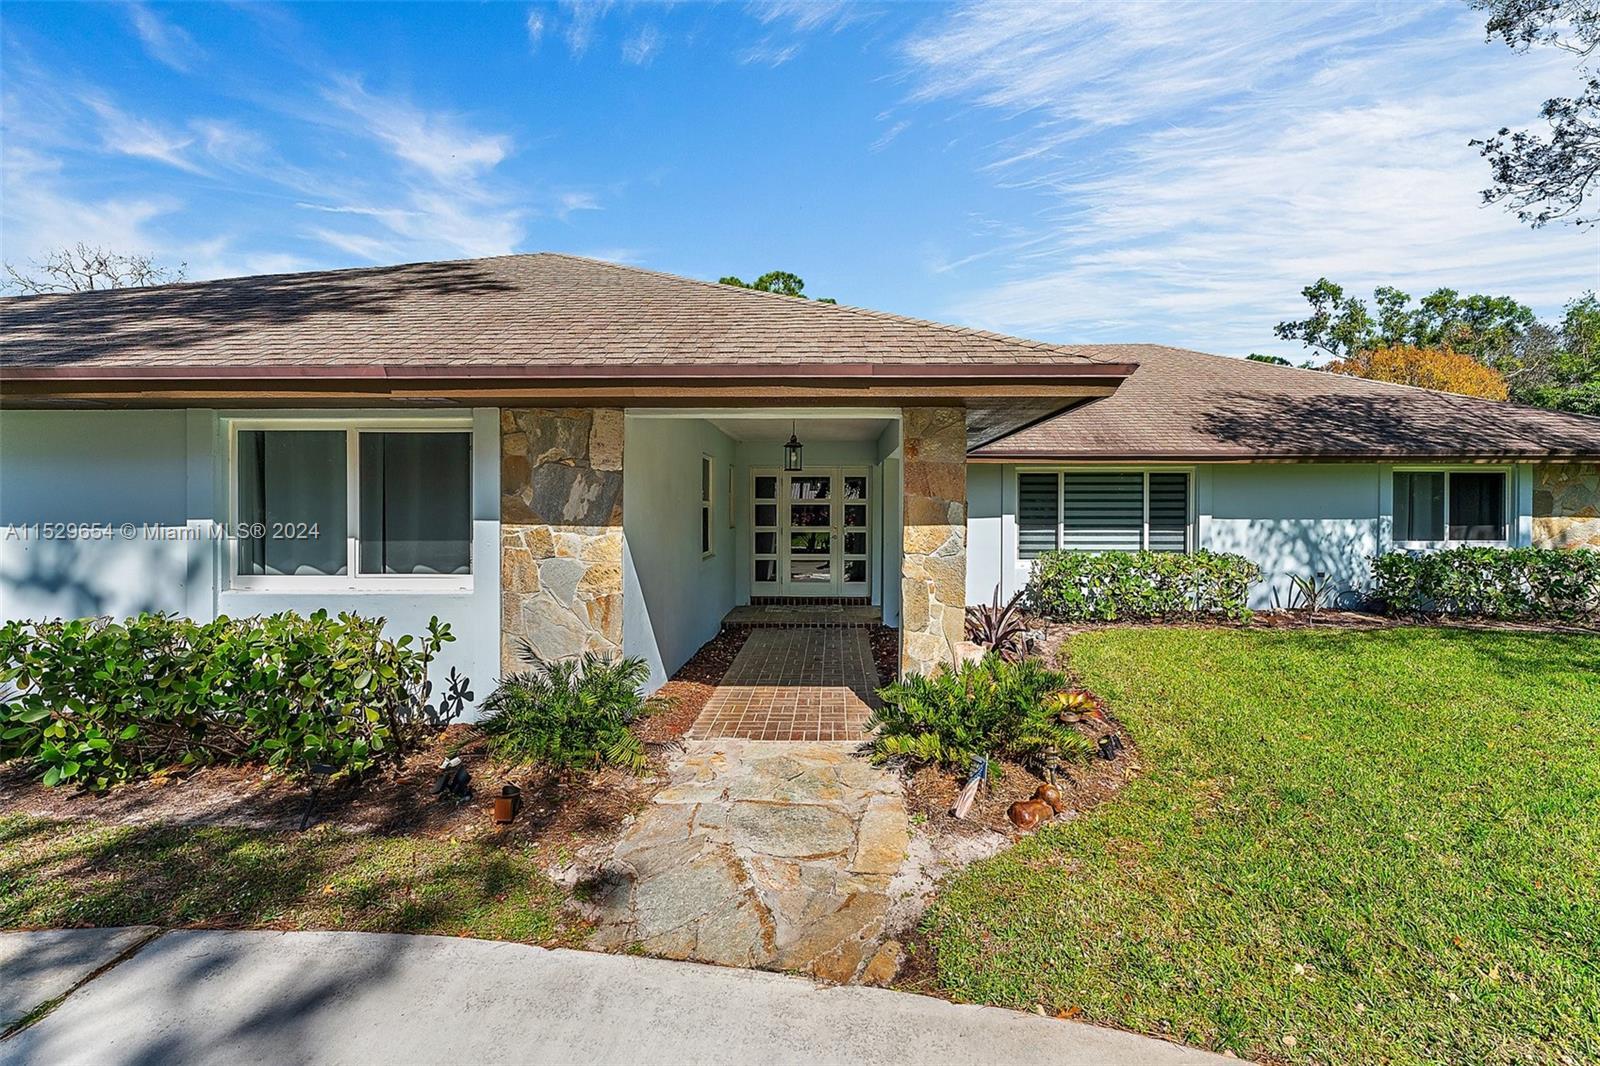 Photo of 6799 Imperial Woods Rd in Jupiter, FL